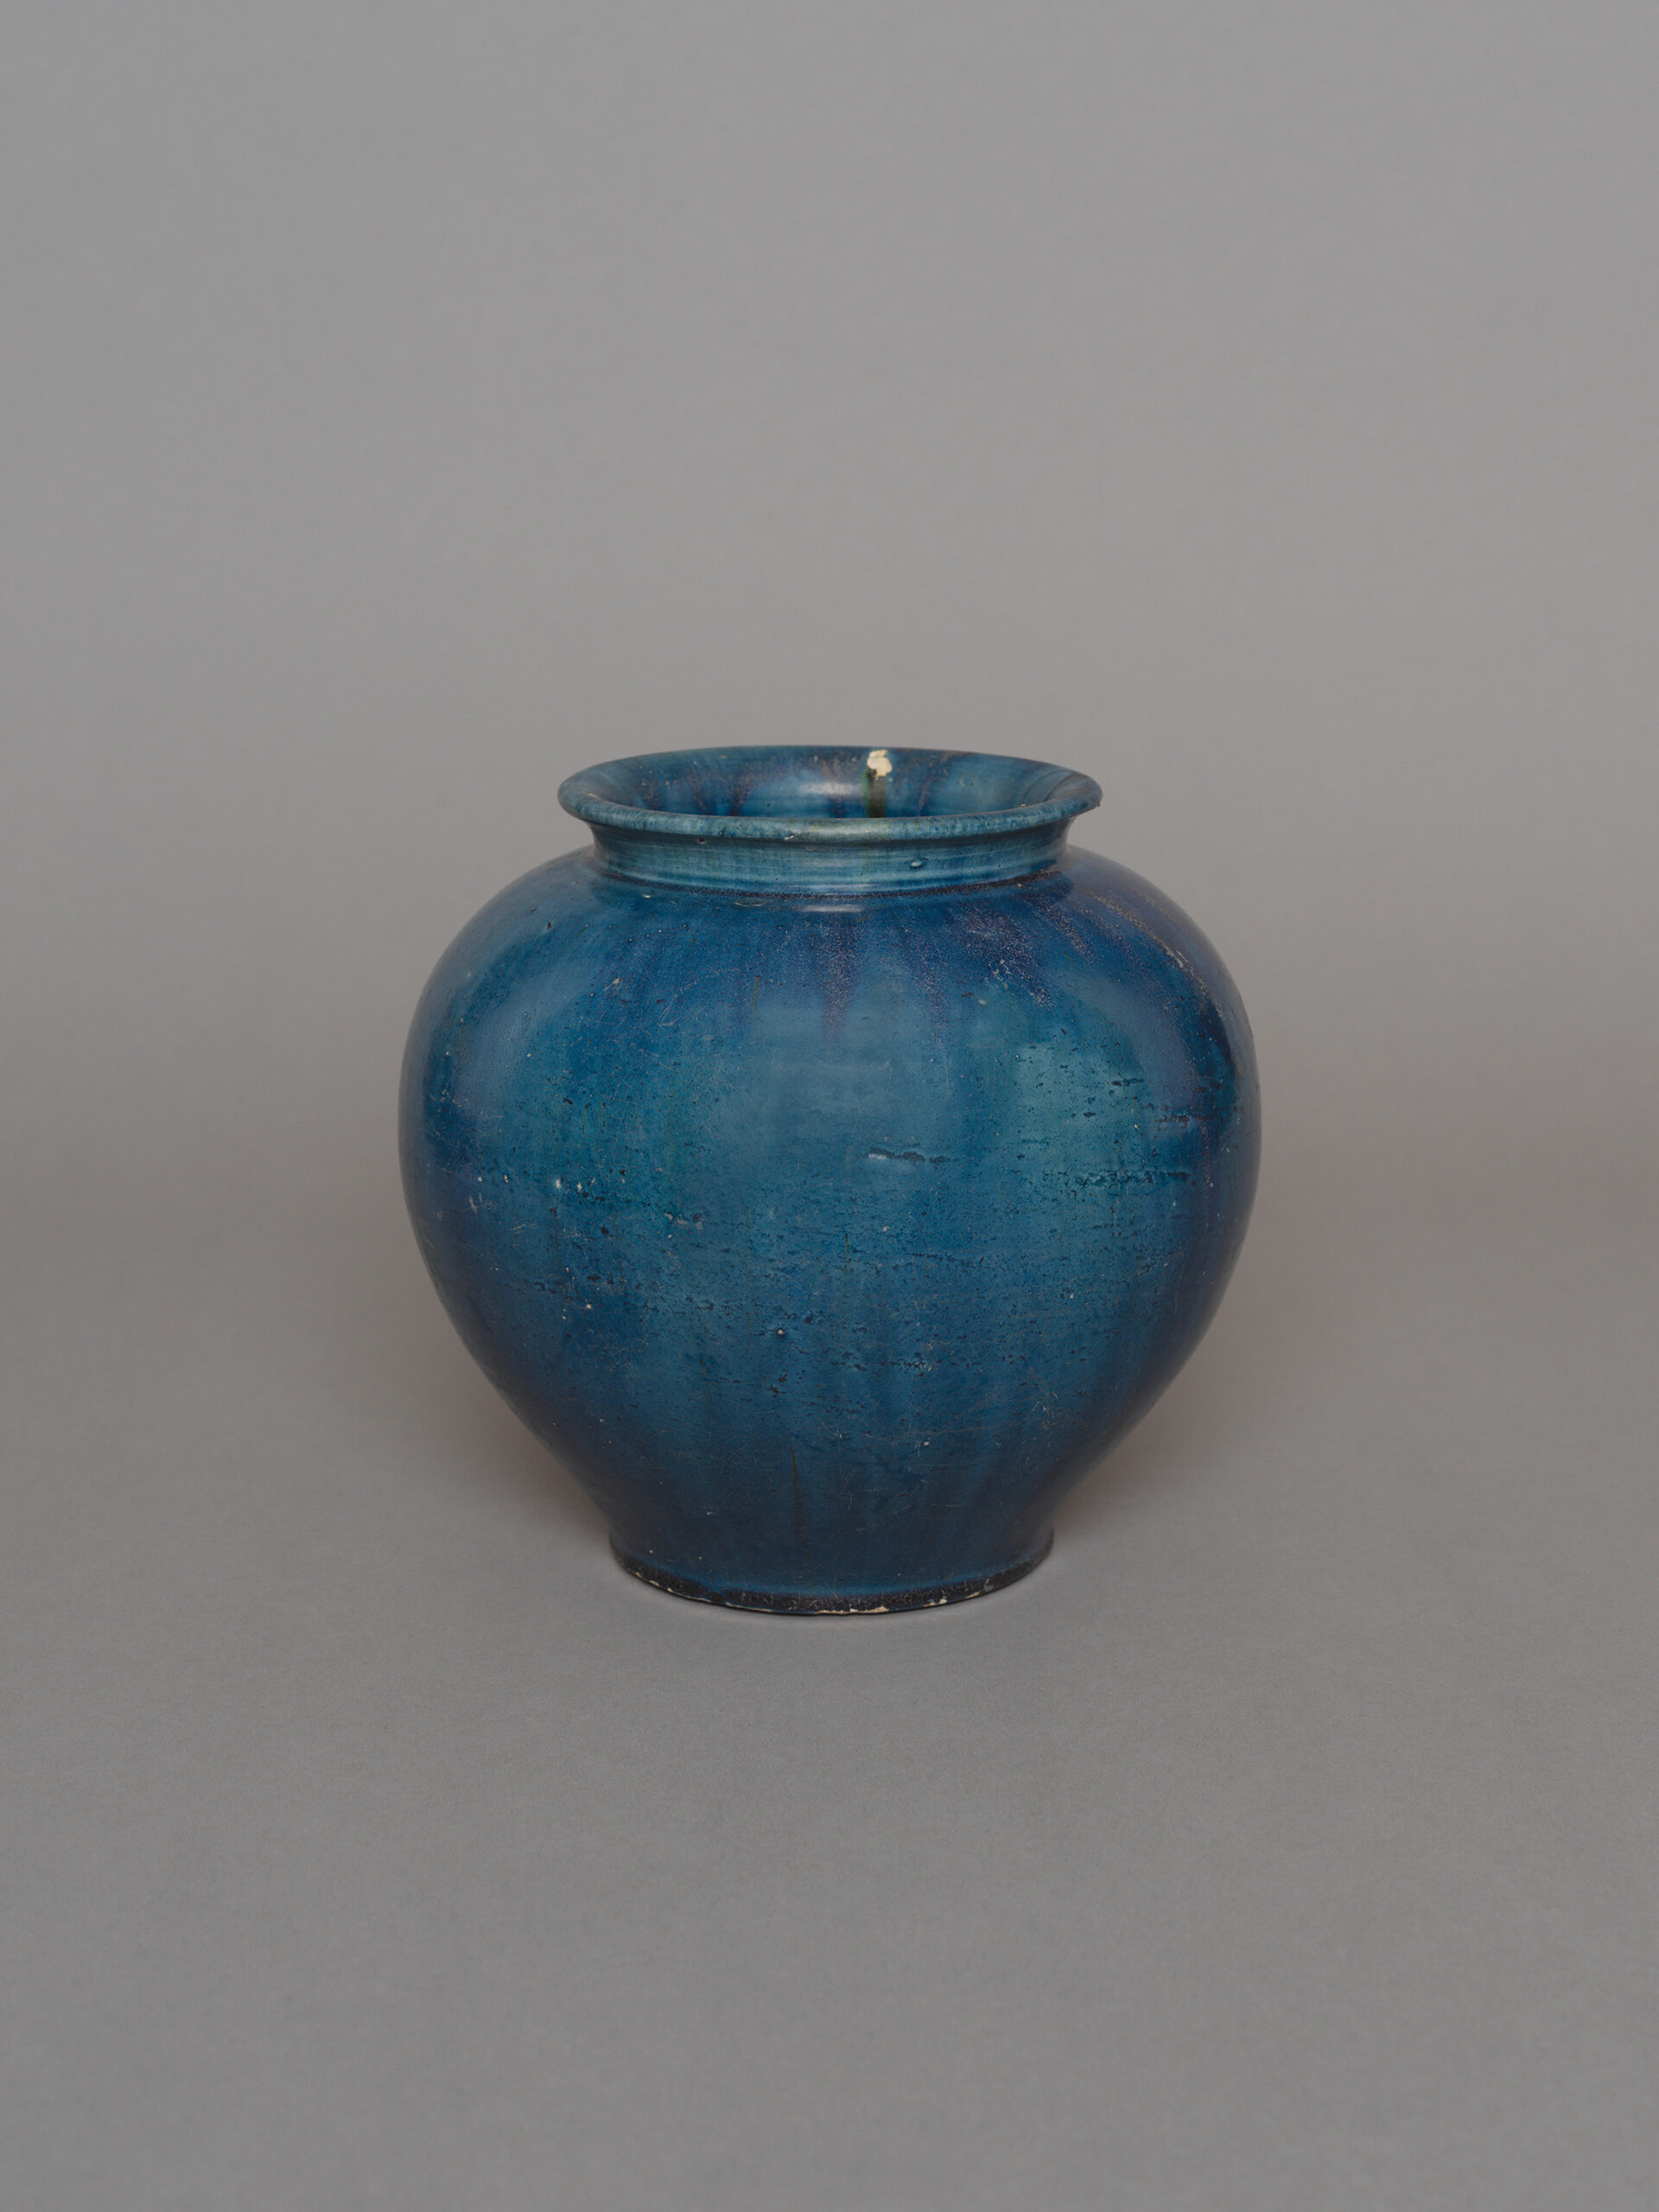 No. 6 - Chinese pottery blue glazed jar, guan, of well-rounded globular form with flat base and short flared neck, covered overall in a rich and even blue glaze extending in large splashes on the interior which also has a clear glaze, the rim with three spur marks from the firing. 8 1/8 inches, 21.7 cm high. Tang dynasty, Gongxian kilns, Henan Province, 7th – 8th century.